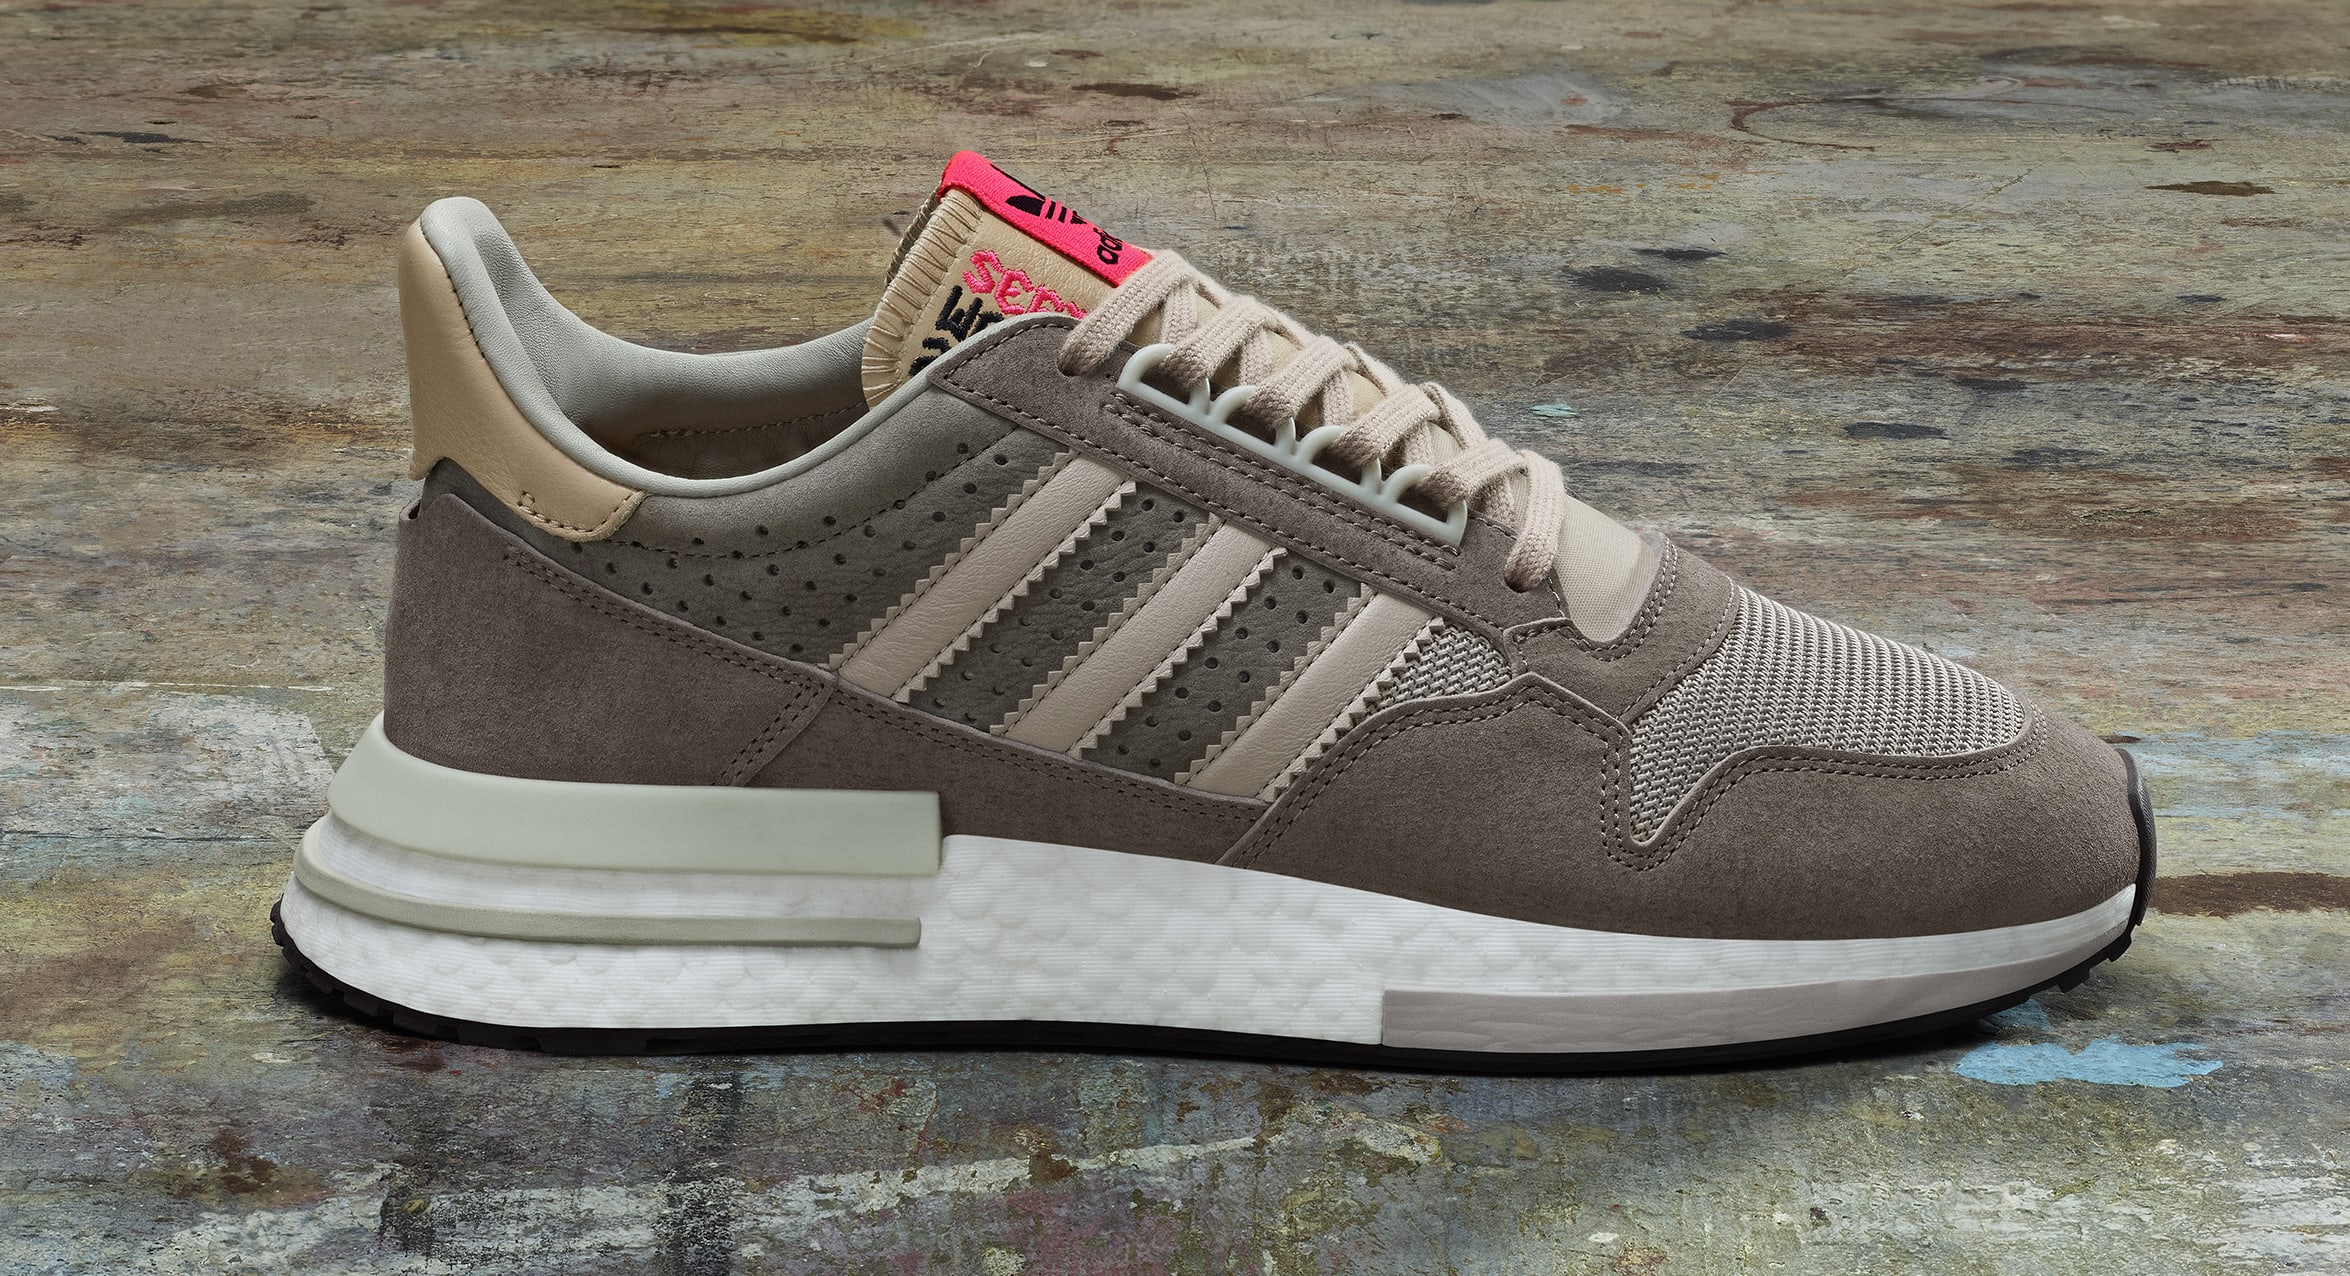 Adidas Consortium ZX500 RM BD7859 (Lateral)